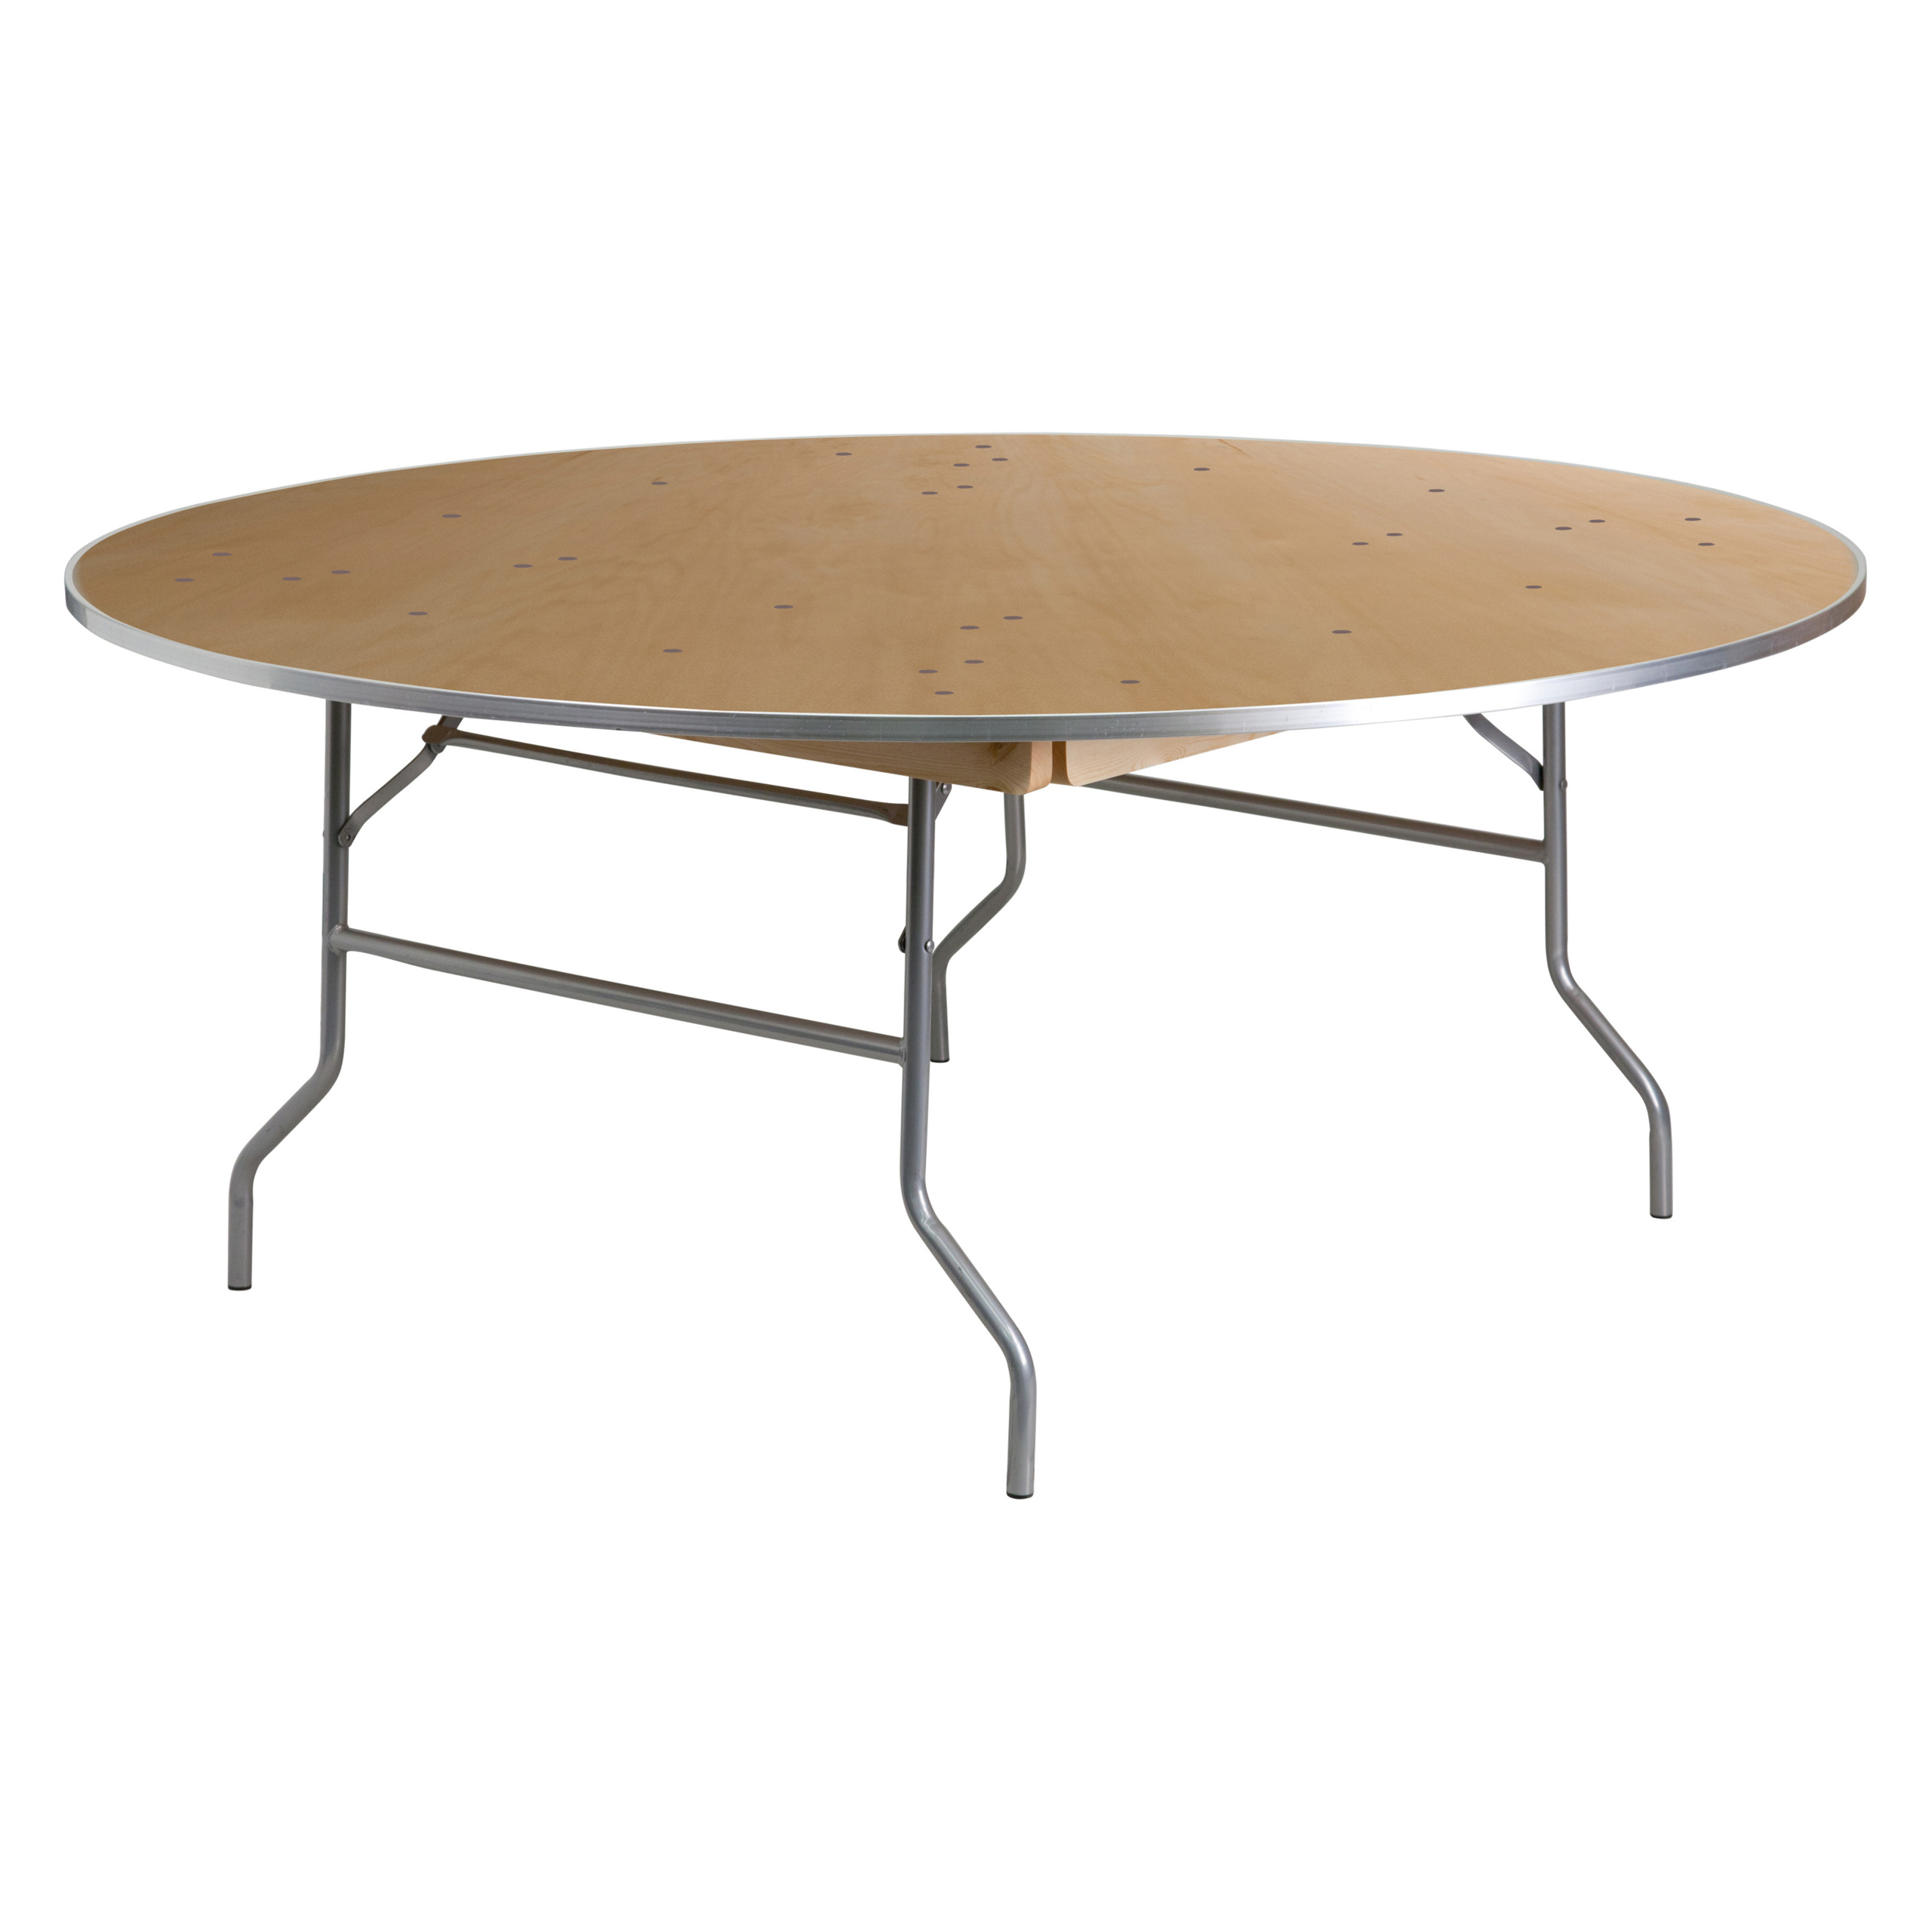 Flash Furniture Round Heavy Duty Birchwood Folding Banquet Table with Metal Edges, 72-Inch